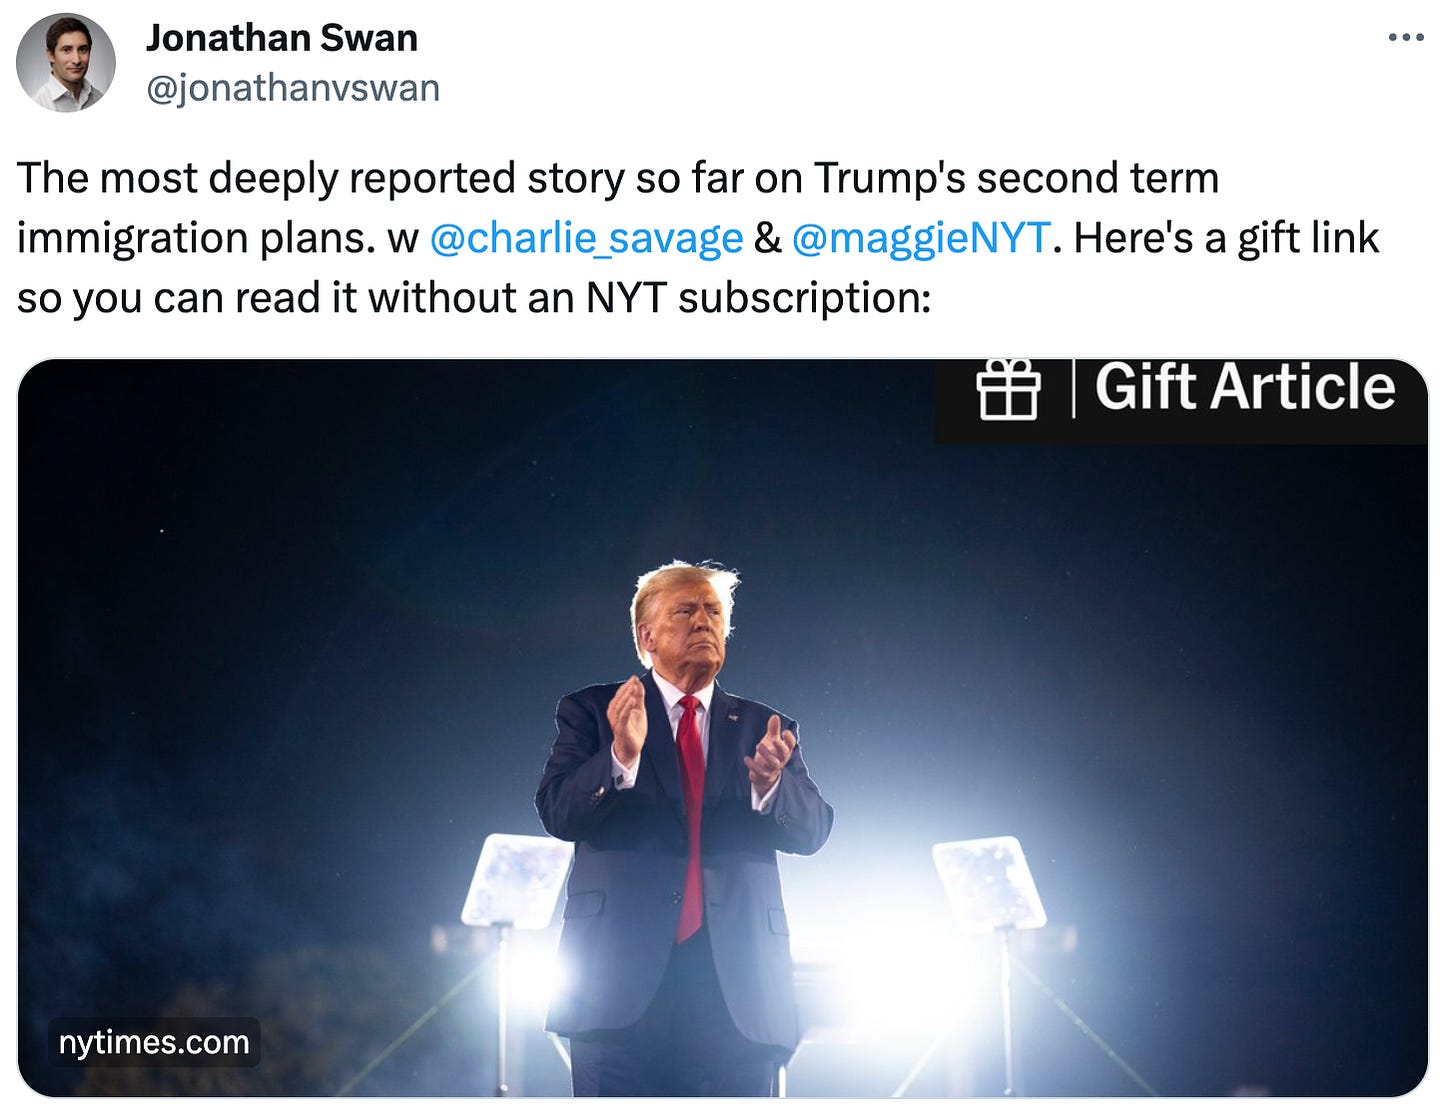  See new posts Conversation Jonathan Swan @jonathanvswan The most deeply reported story so far on Trump's second term immigration plans. w  @charlie_savage  &  @maggieNYT . Here's a gift link so you can read it without an NYT subscription: